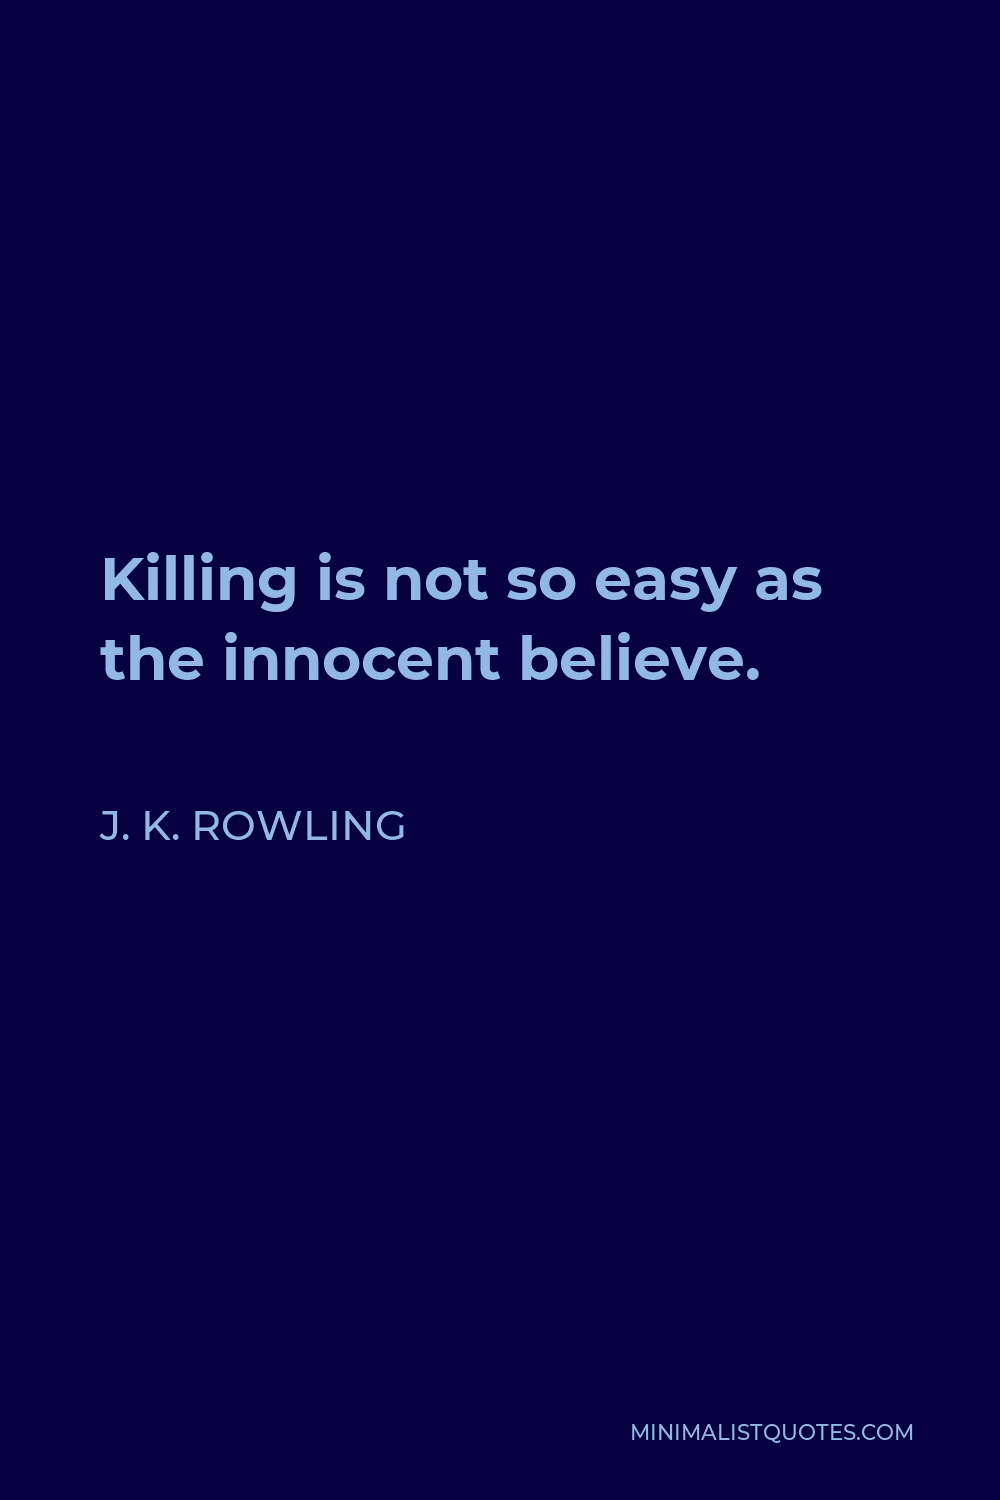 J. K. Rowling Quote - Killing is not so easy as the innocent believe.